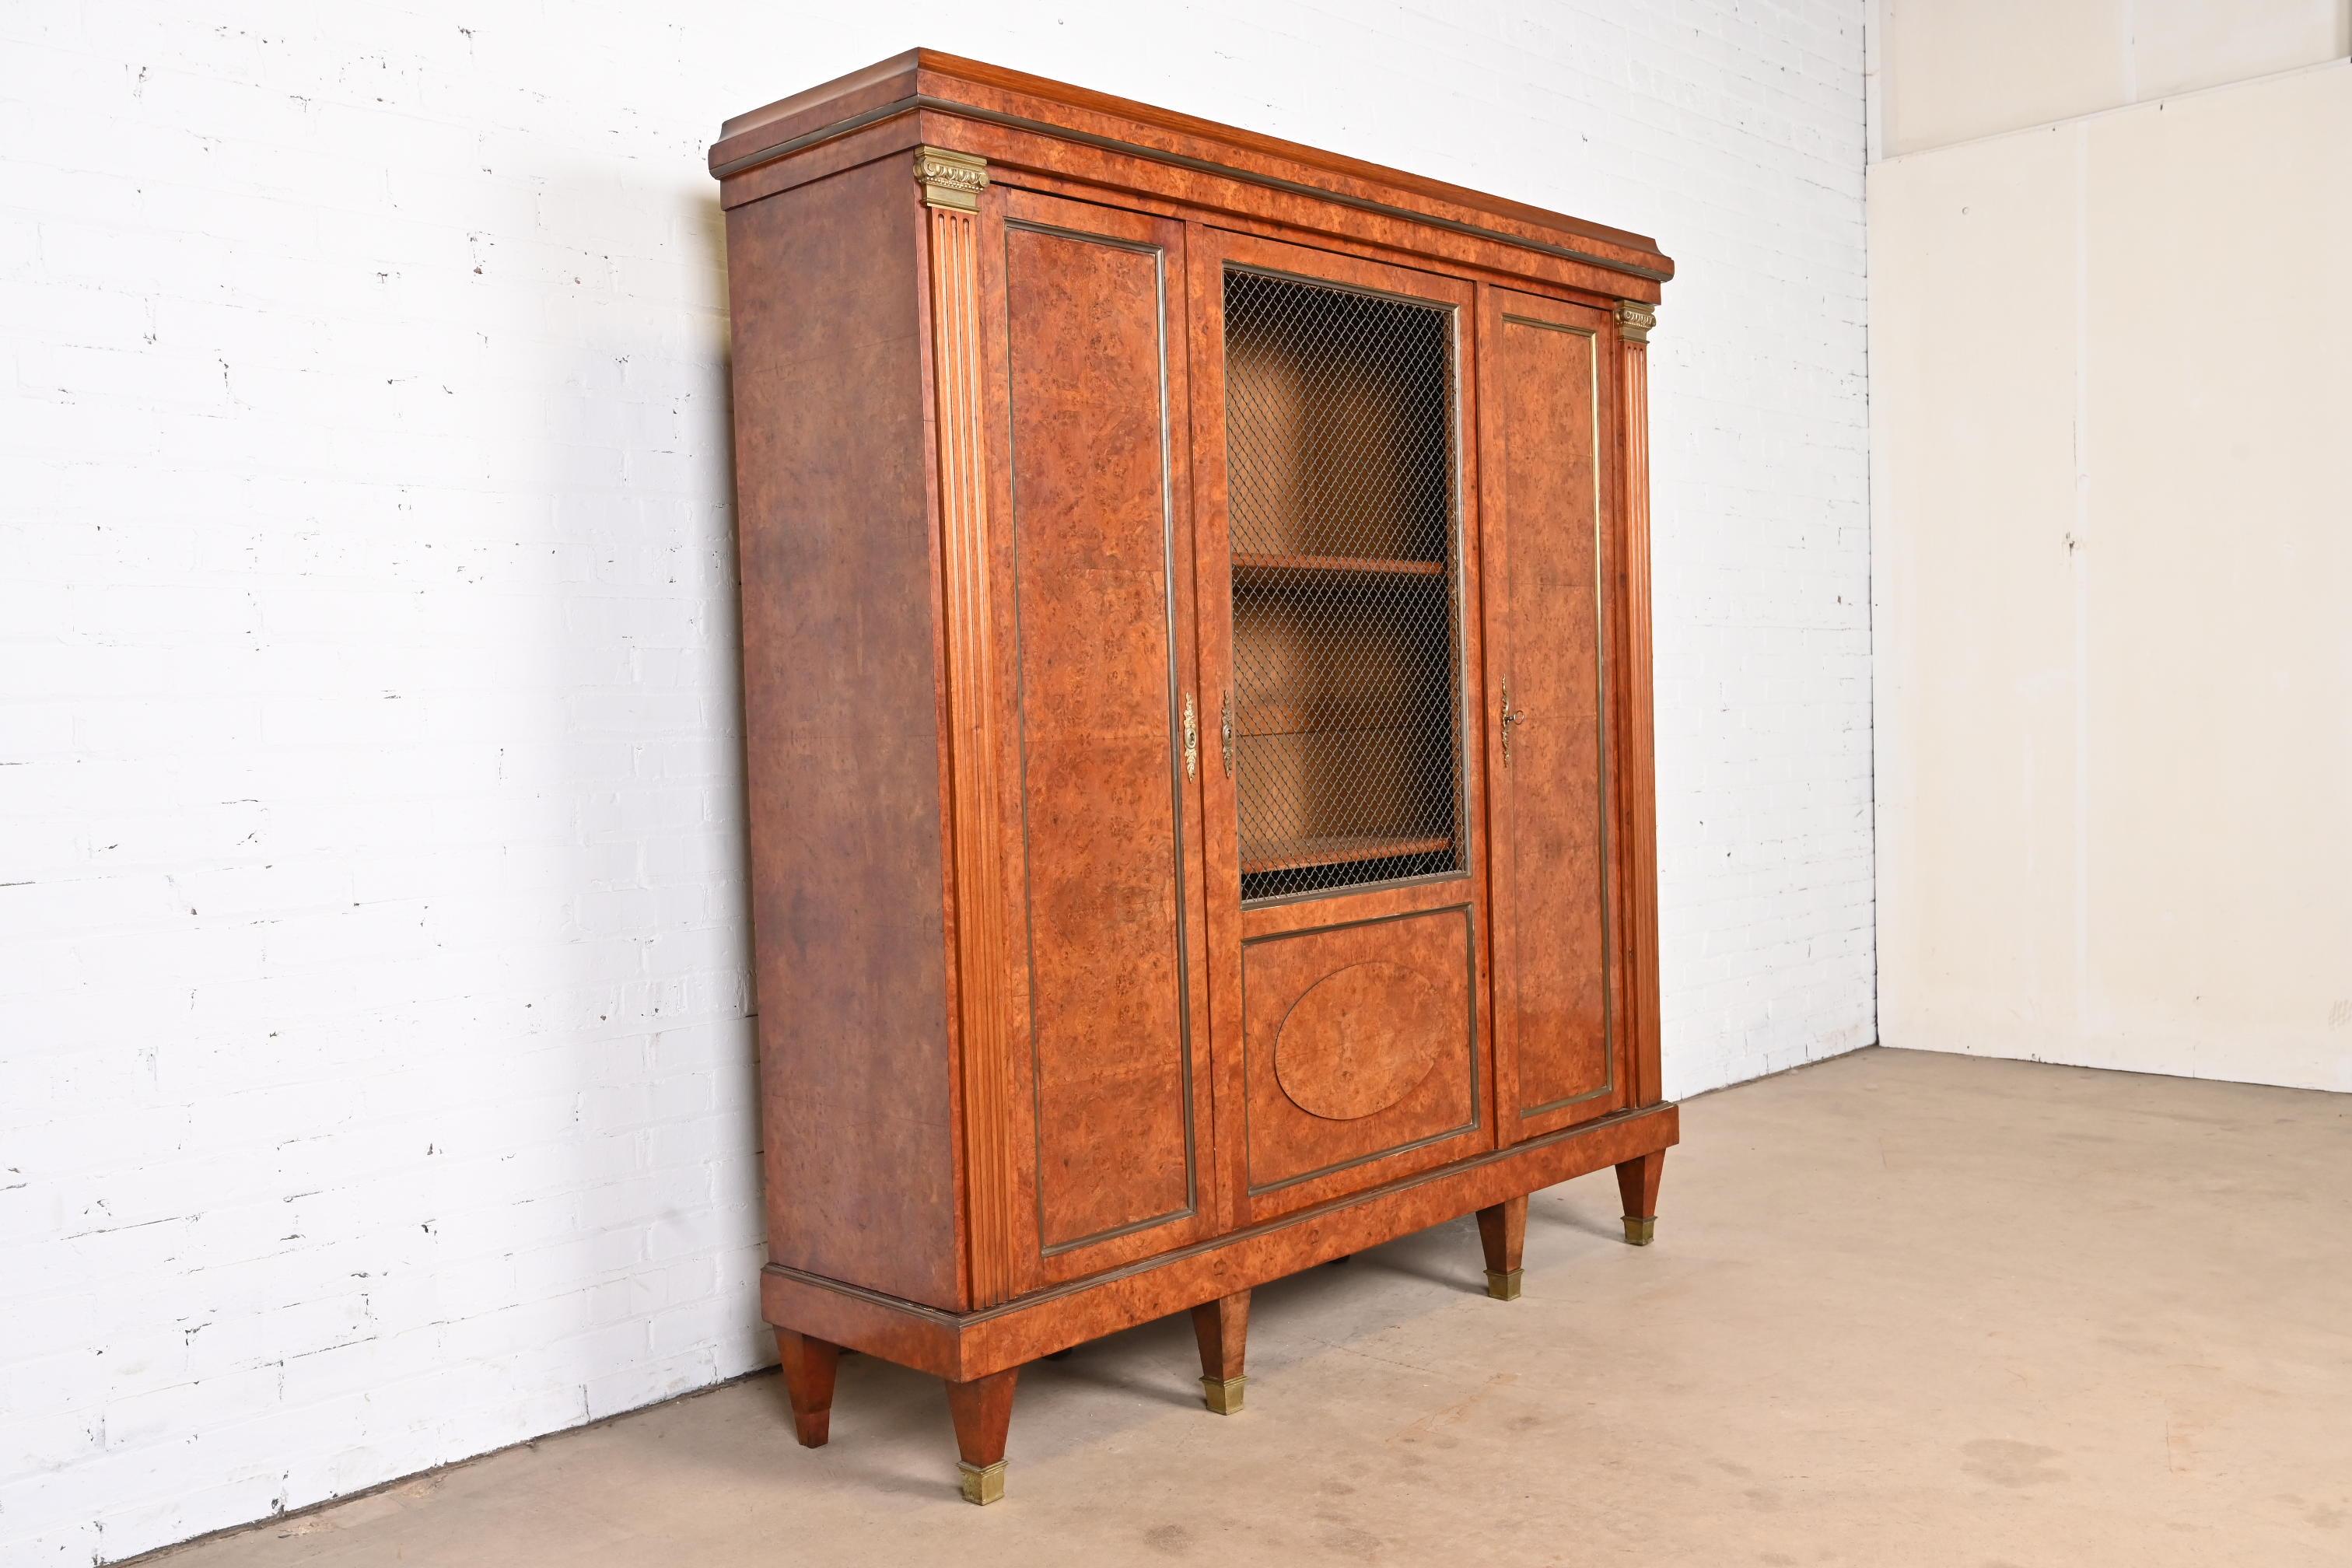 Antique French Empire Burl Wood Bibliotheque Bookcase Cabinet, Circa 1880s In Good Condition For Sale In South Bend, IN